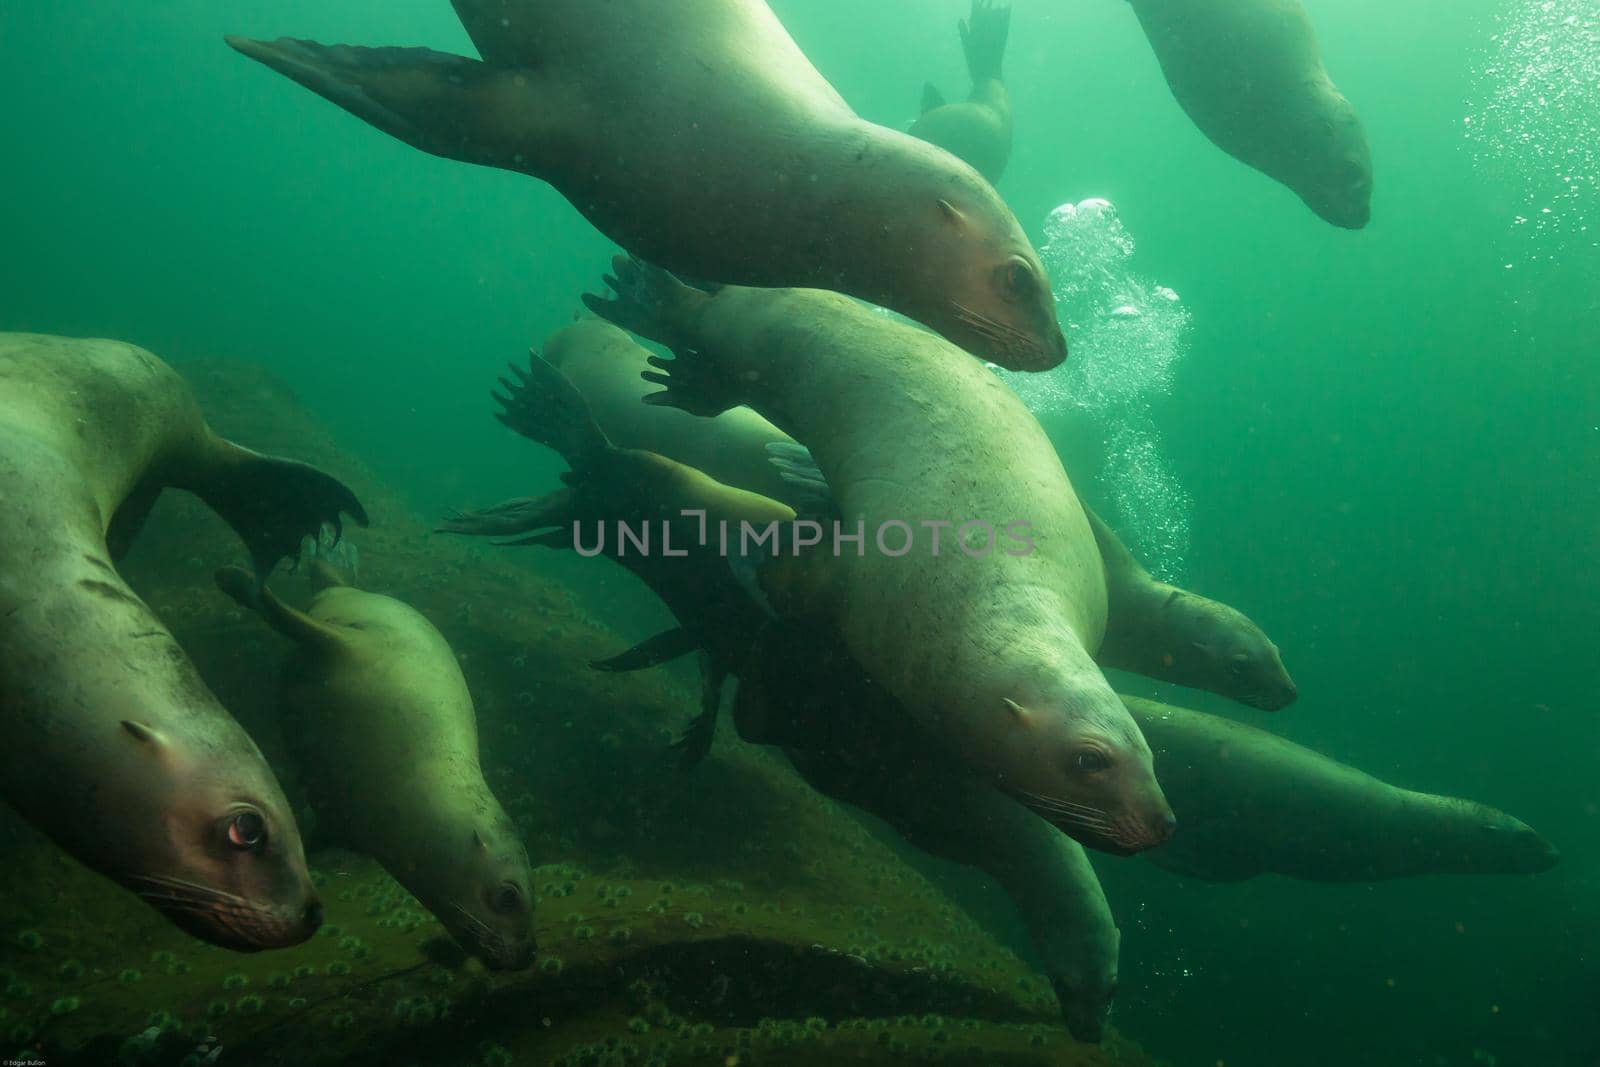 A herd of young sea lions swimming underwater in Pacific Ocean by edb3_16